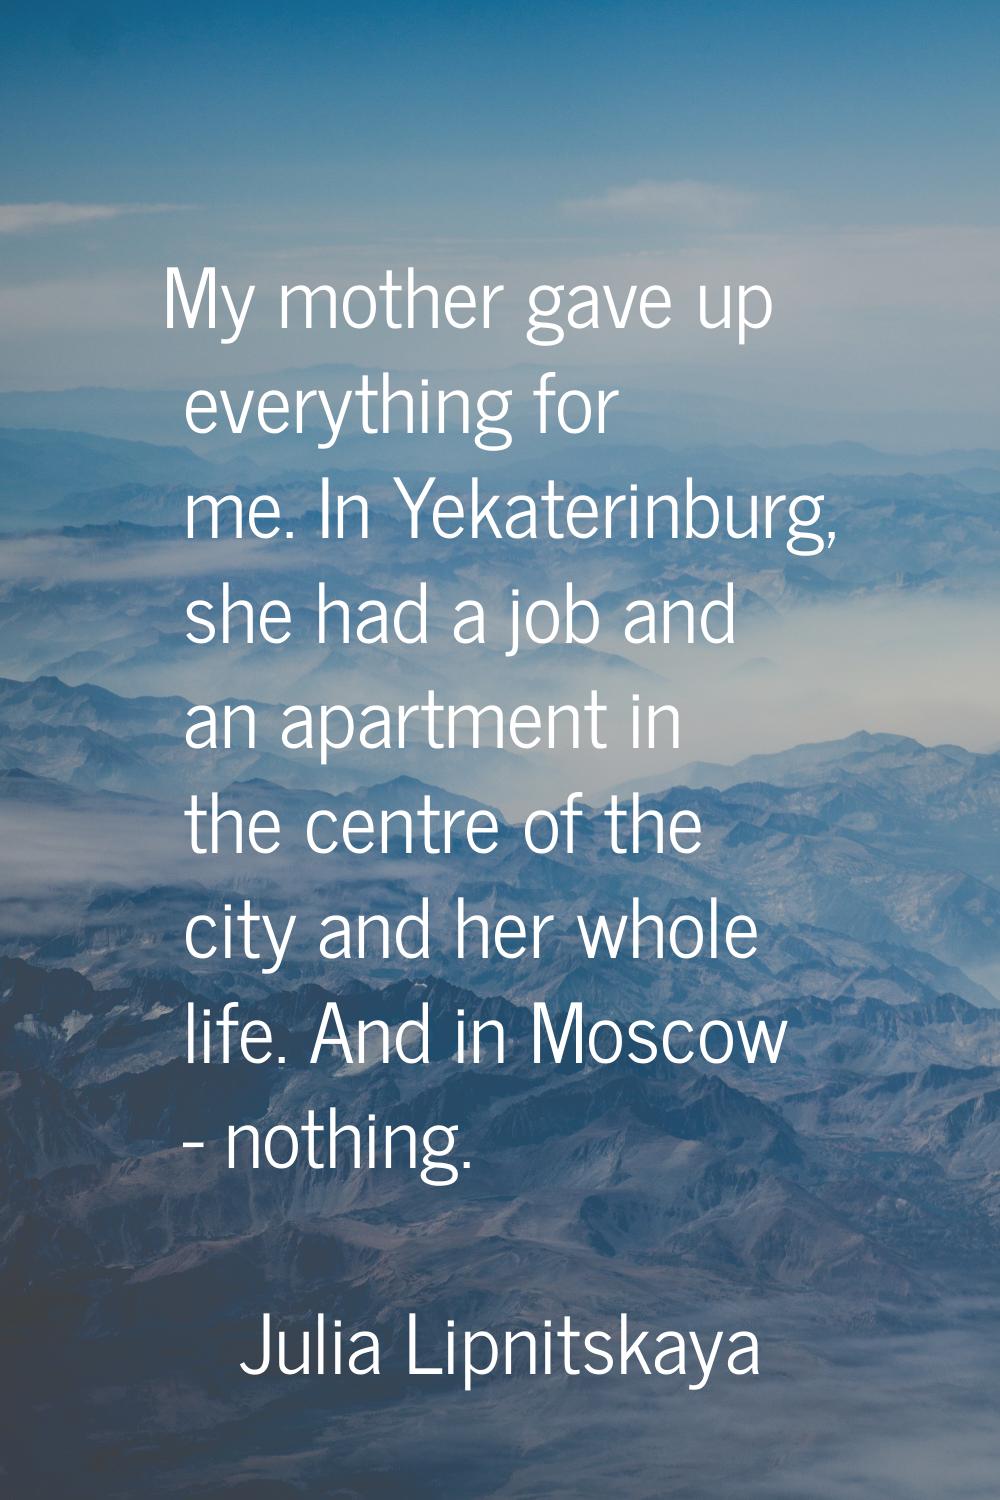 My mother gave up everything for me. In Yekaterinburg, she had a job and an apartment in the centre